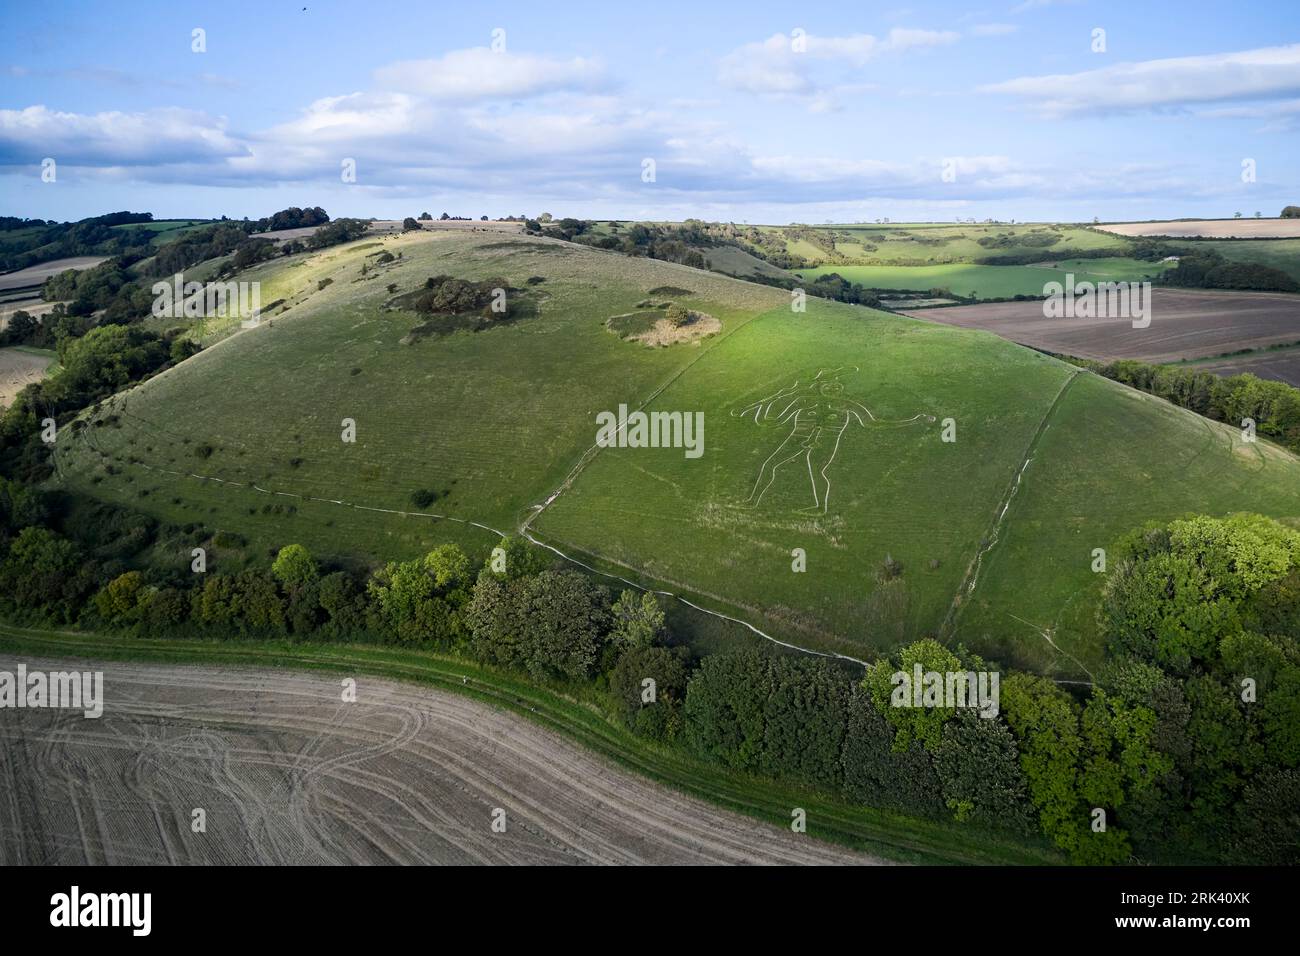 The Cerne Giant or Cerne Abbas Giant, Cerne Abbas in Dorset, Britain, UK Stock Photo